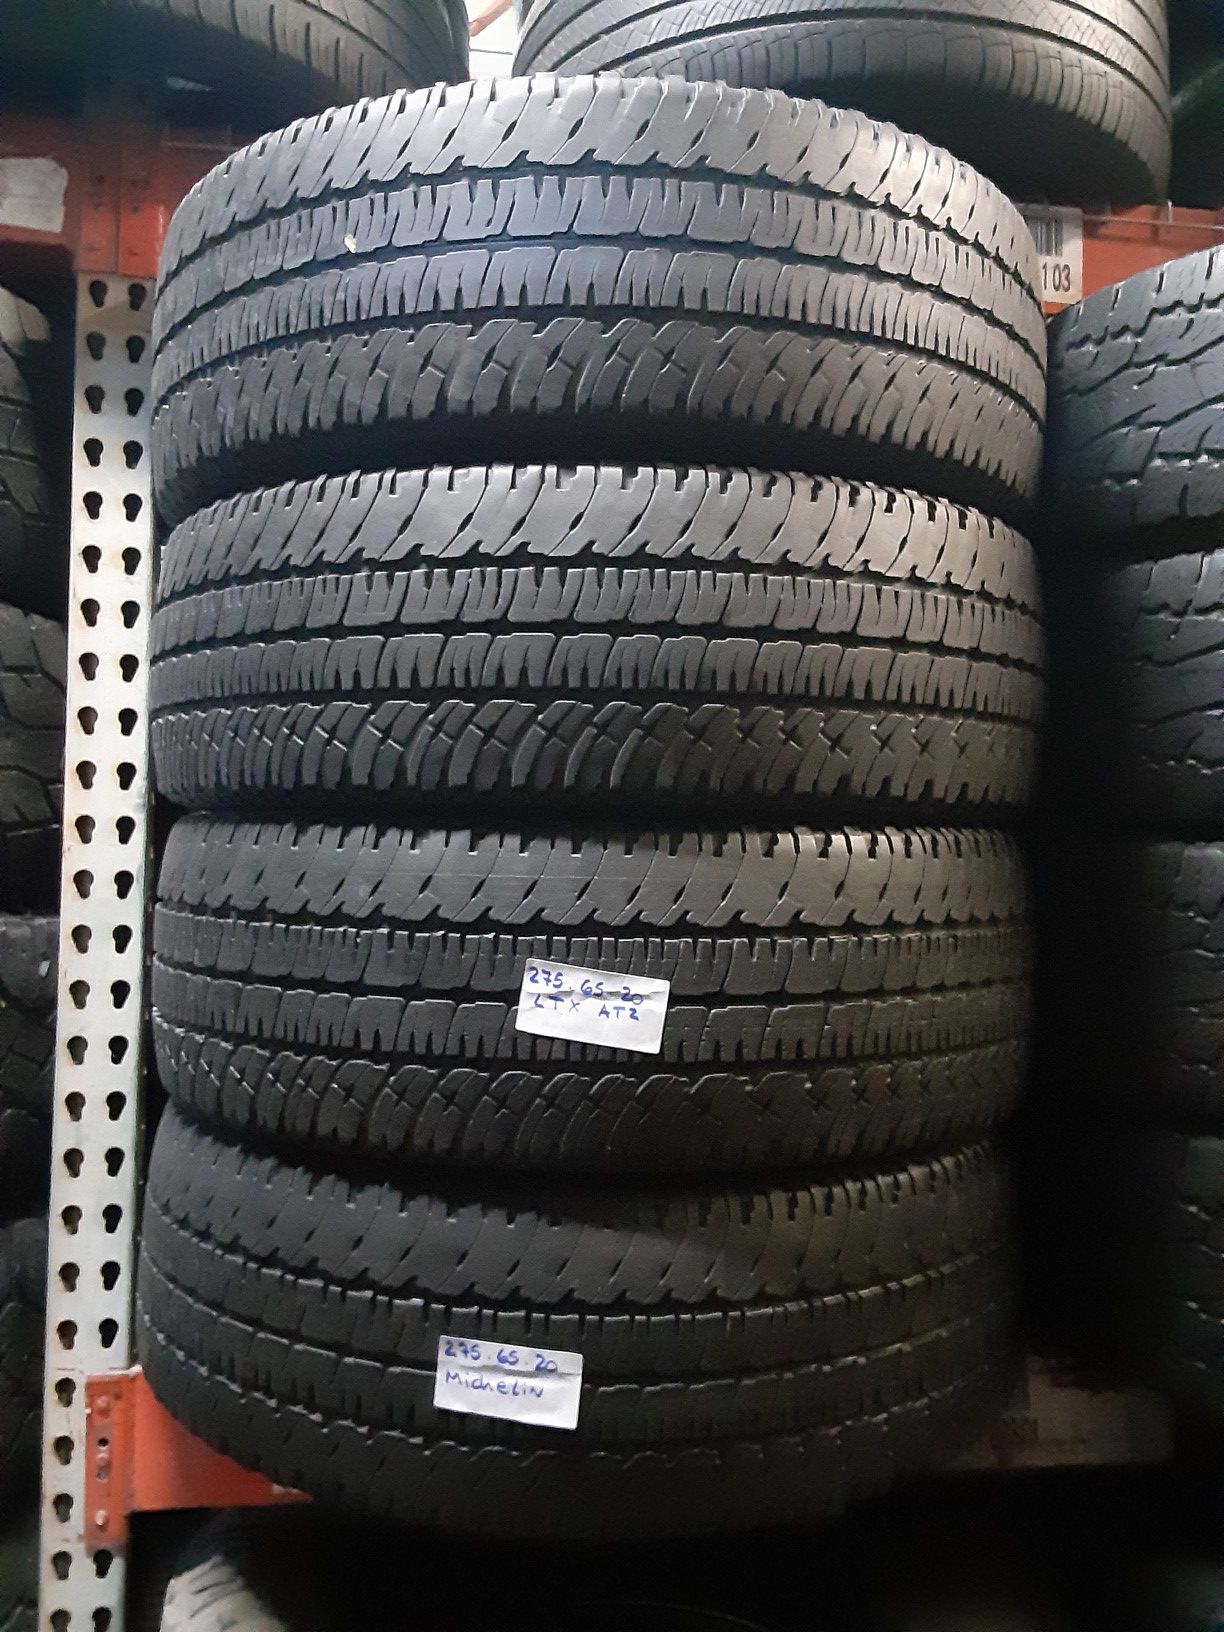 4 USED TIRES LT275/65R20 MICHELIN LTX AT2 10PLY 275 65 20